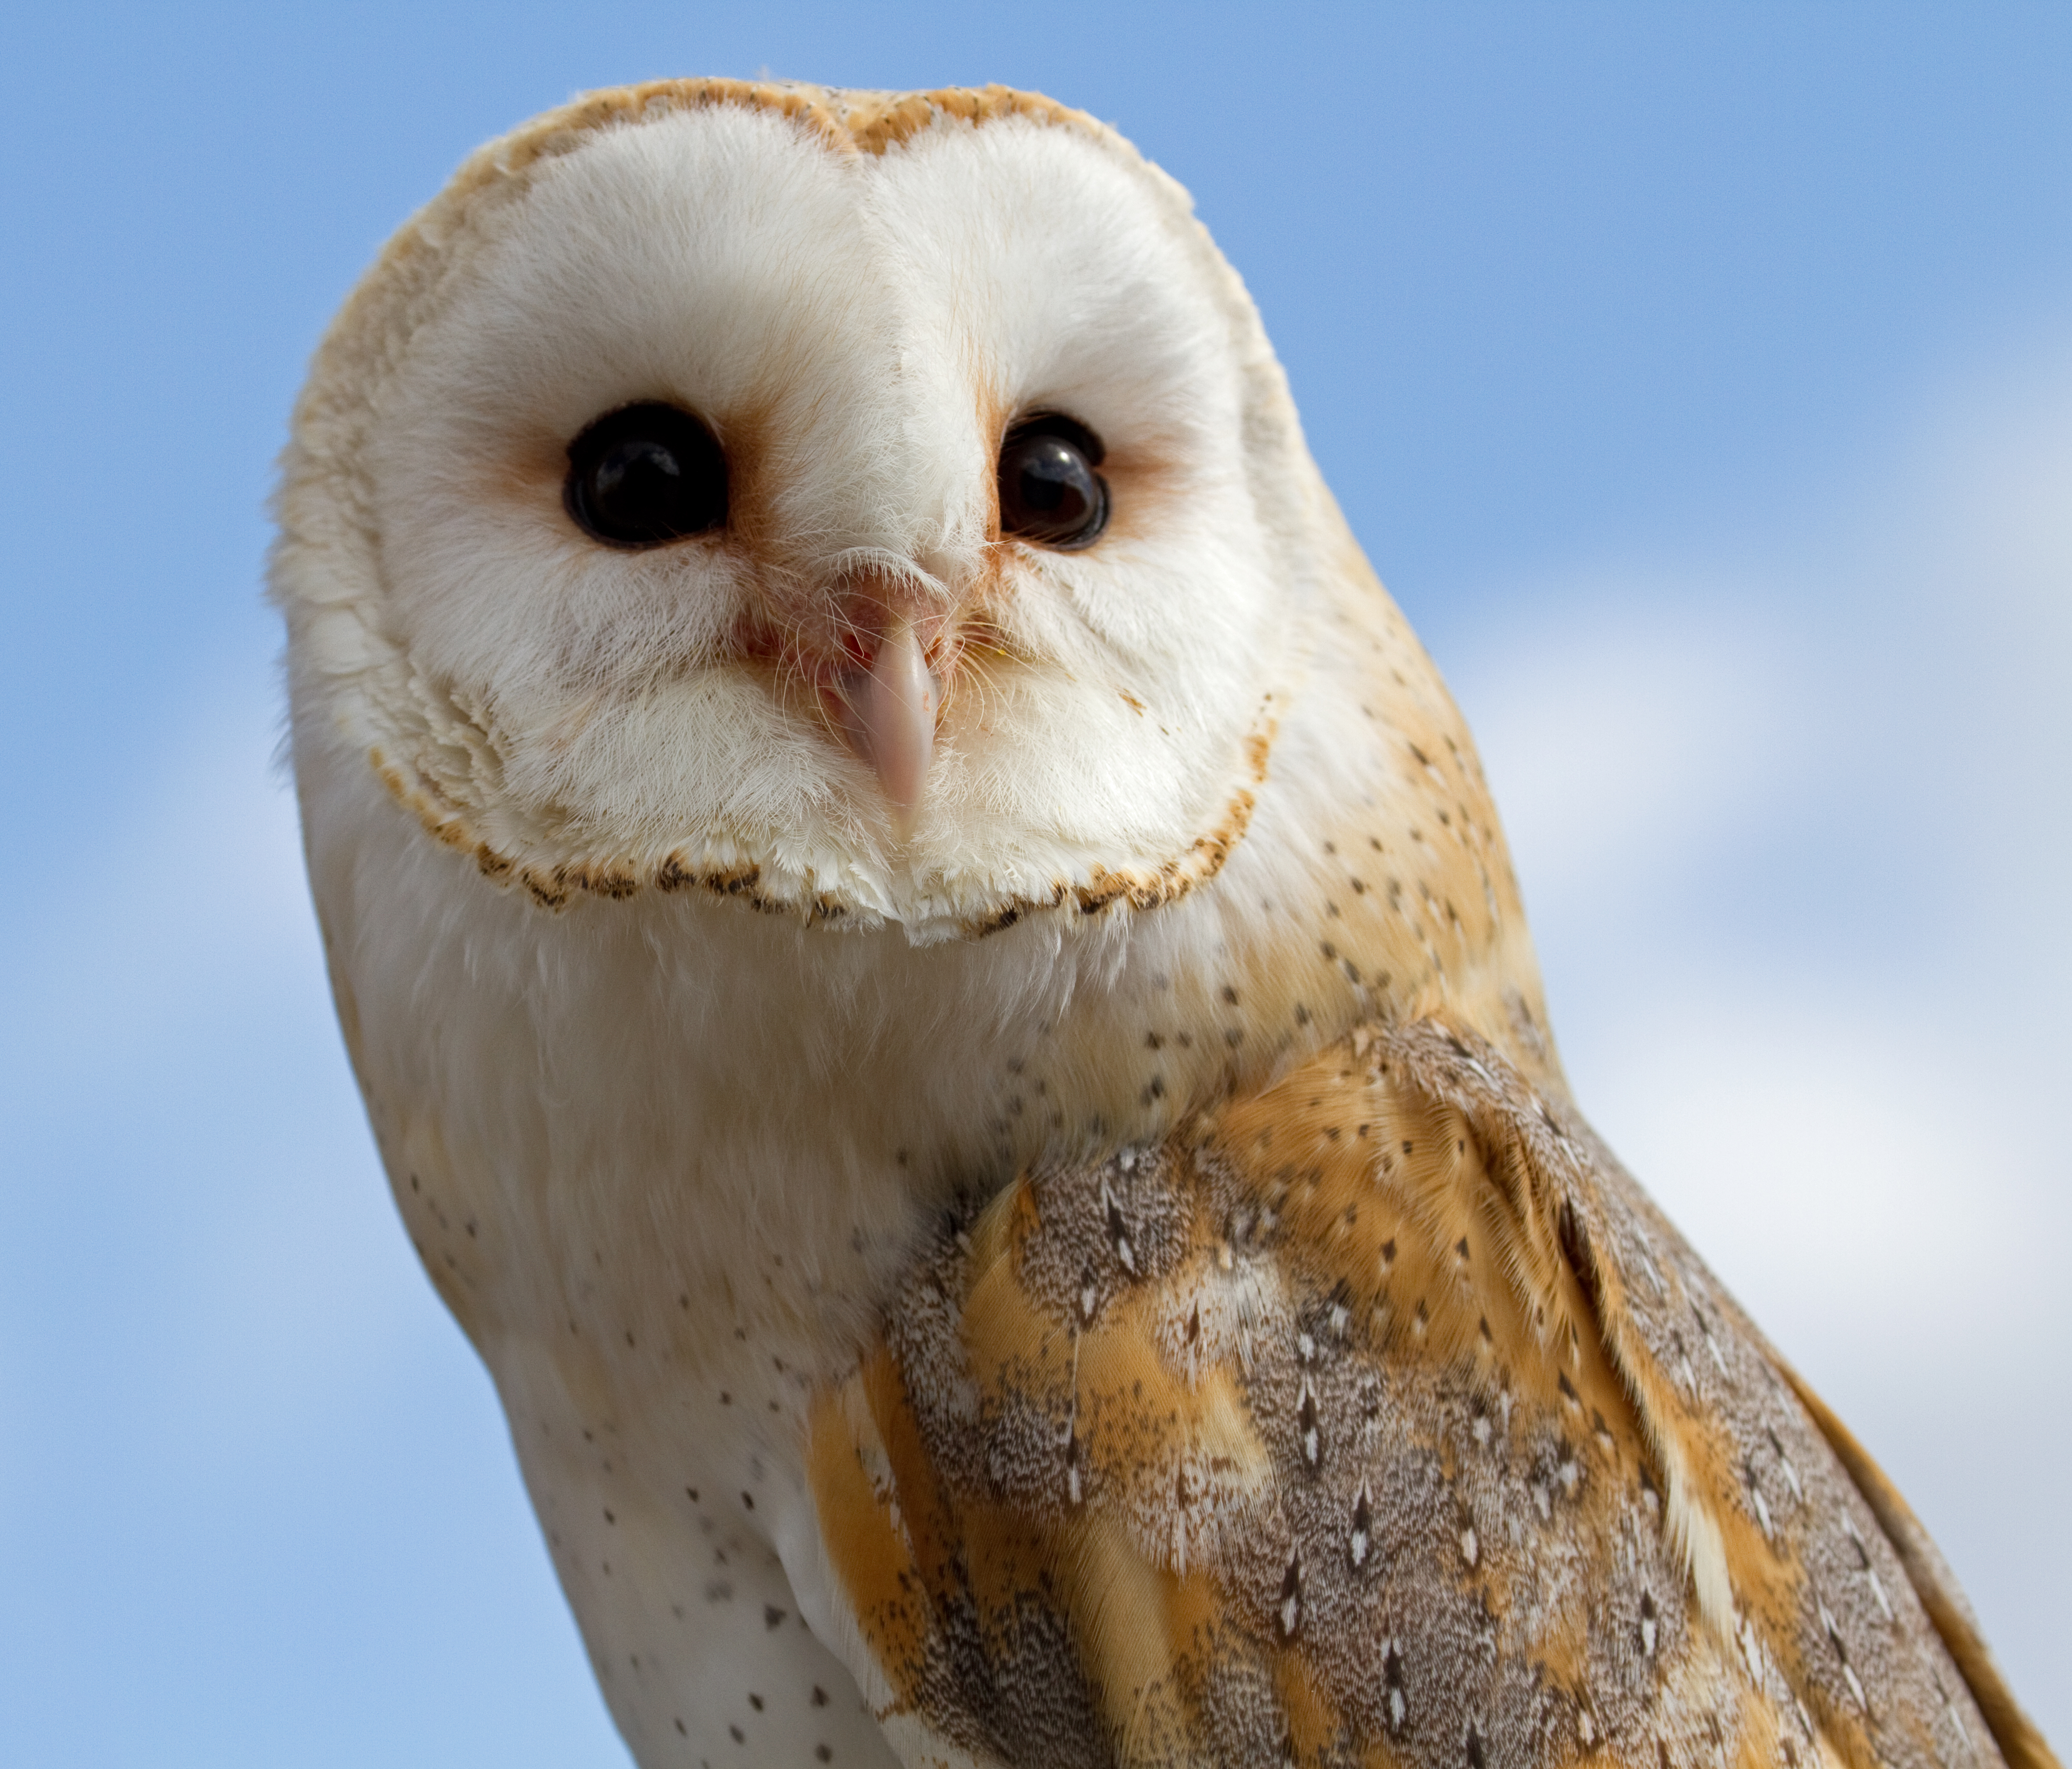 Barn Owl Backgrounds, Compatible - PC, Mobile, Gadgets| 4044x3452 px